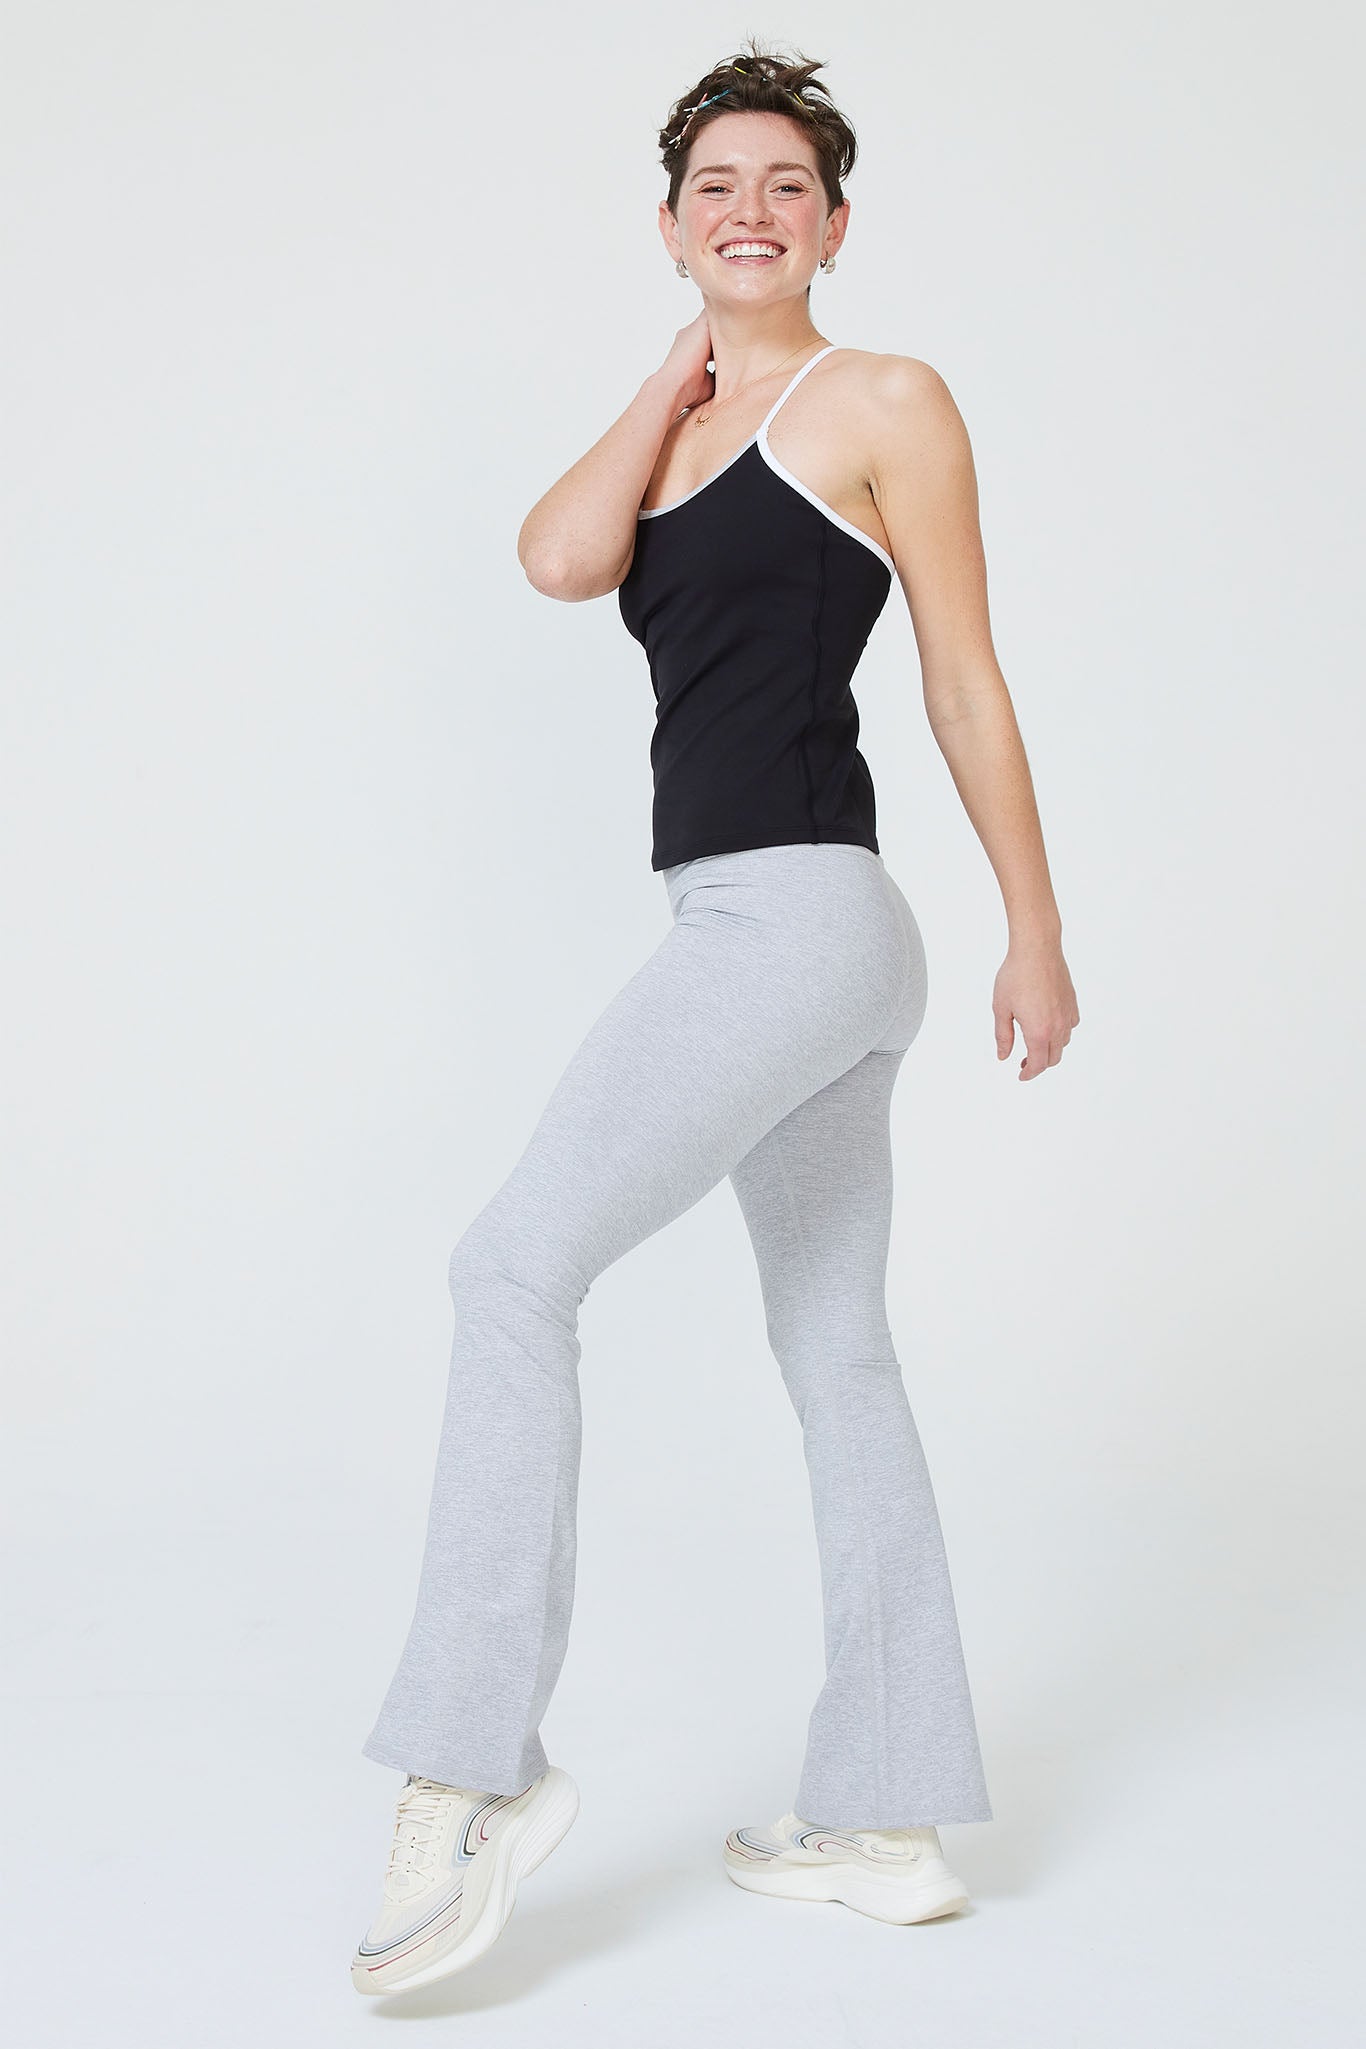 Womens Black And Grey Flare Gray Flare Leggings With Bell Bottom